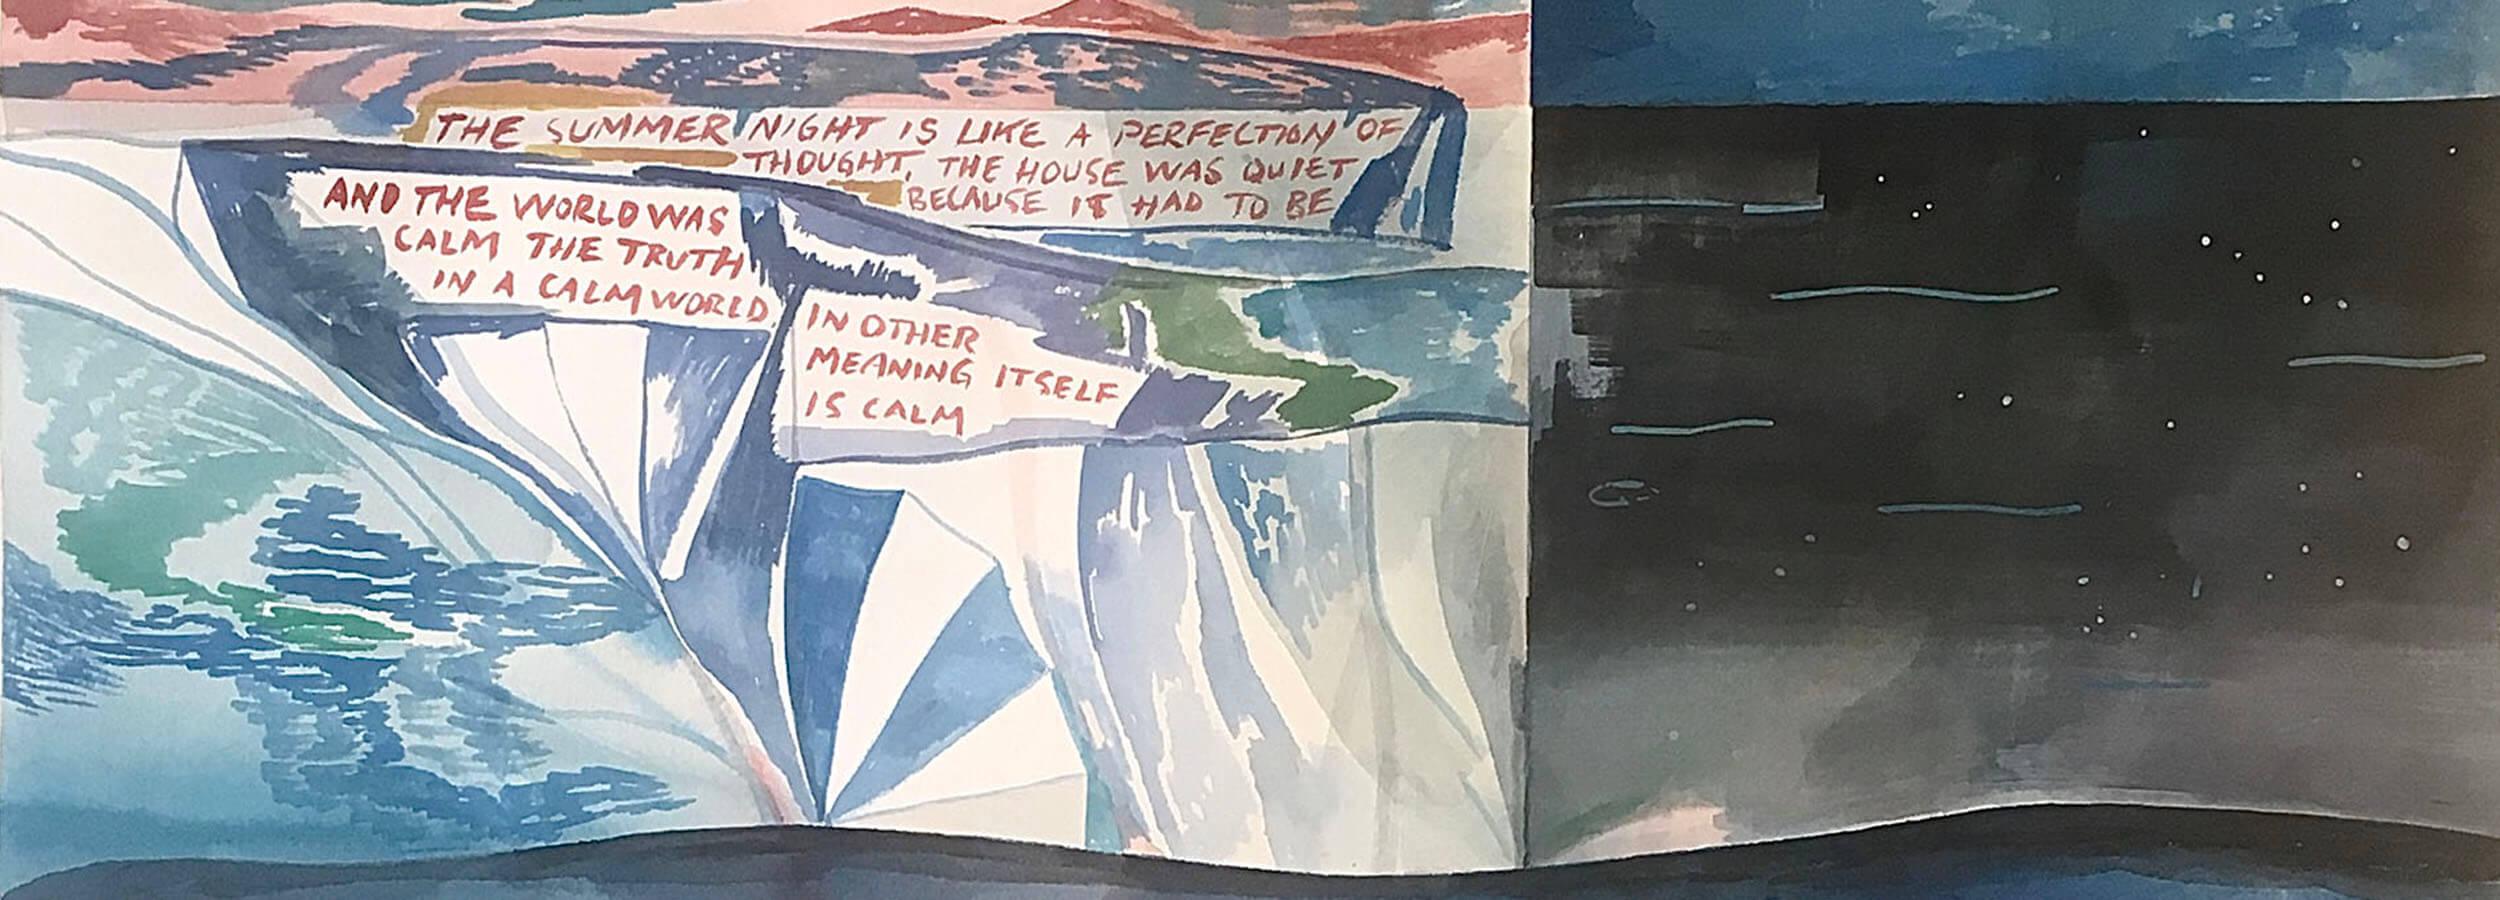 The picture shows a zoomed detail of the painting "The house was The house was quiet and the world was calm after Wallace Stevens"